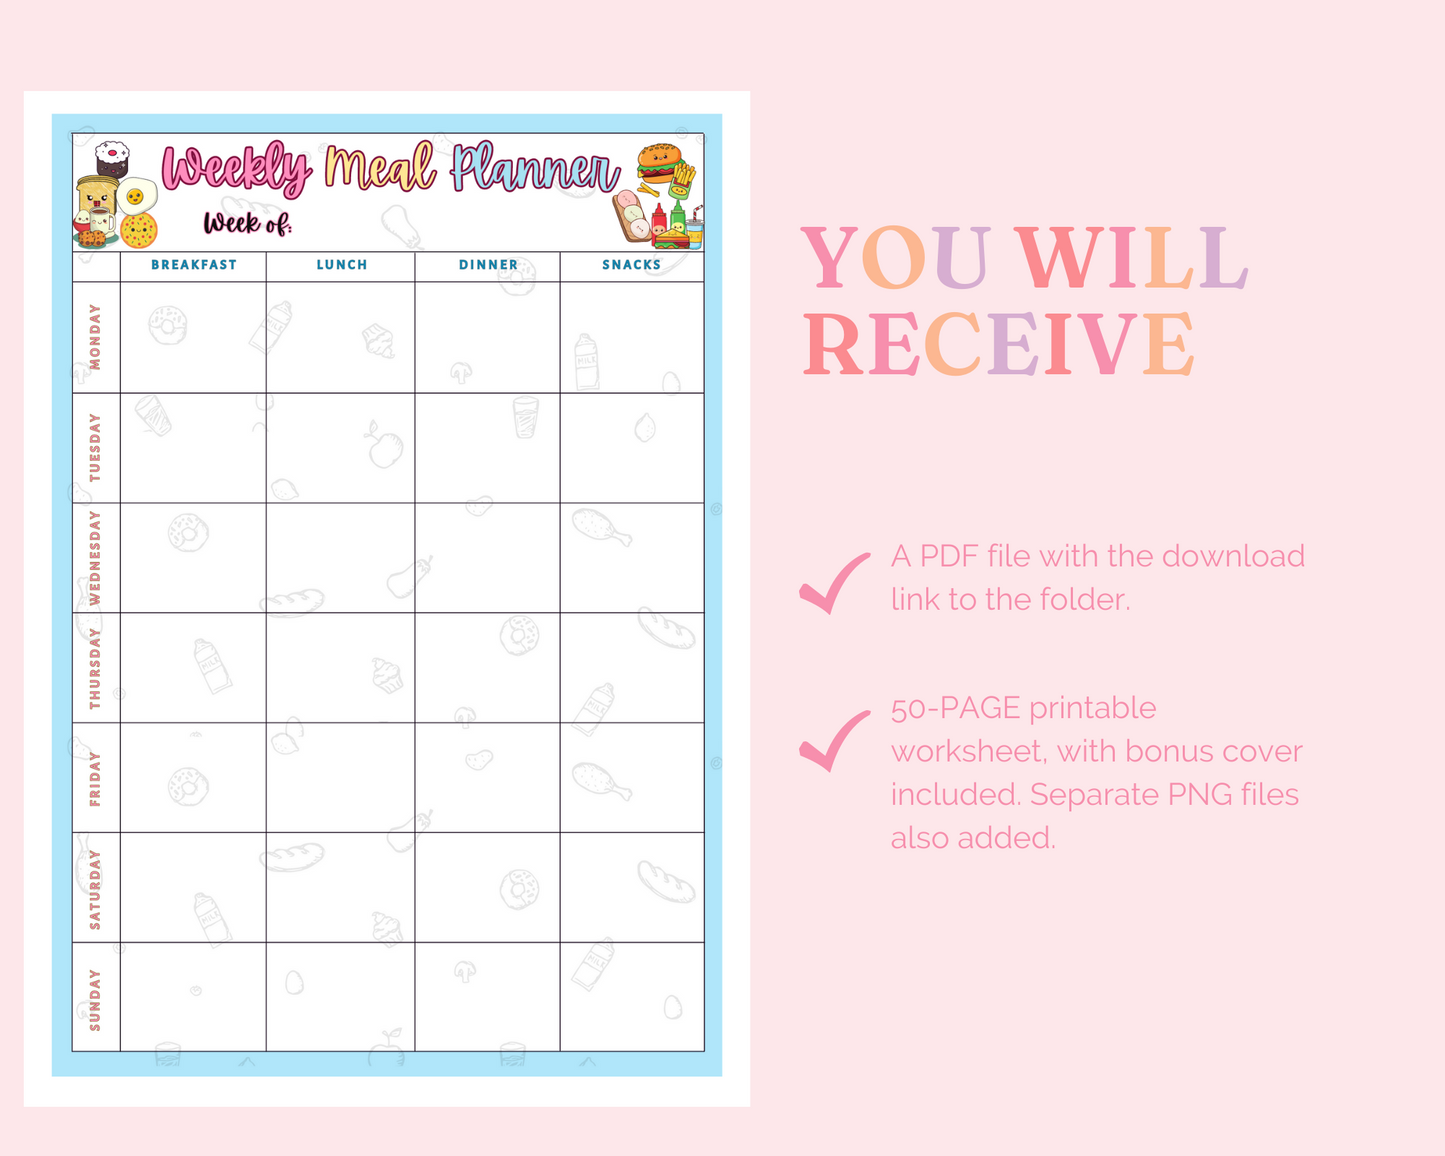 Weekly Meal Planner Printable – A4 Size – 6 Stylish Designs – PDF, PNG, and Canva Template – Commercial License